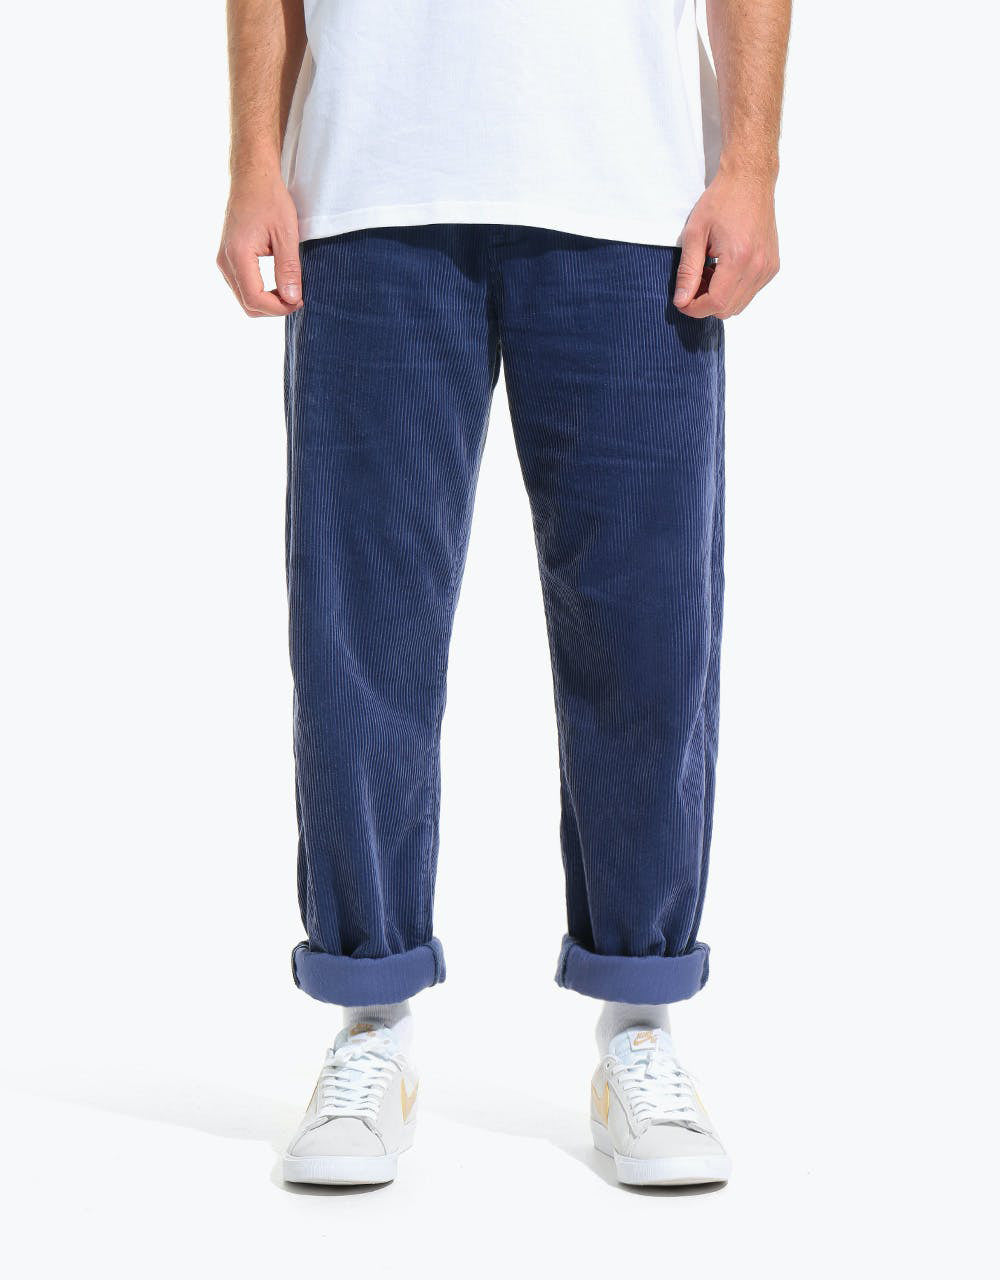 Route One Relaxed Fit Big Wale Cords - Shady Blue